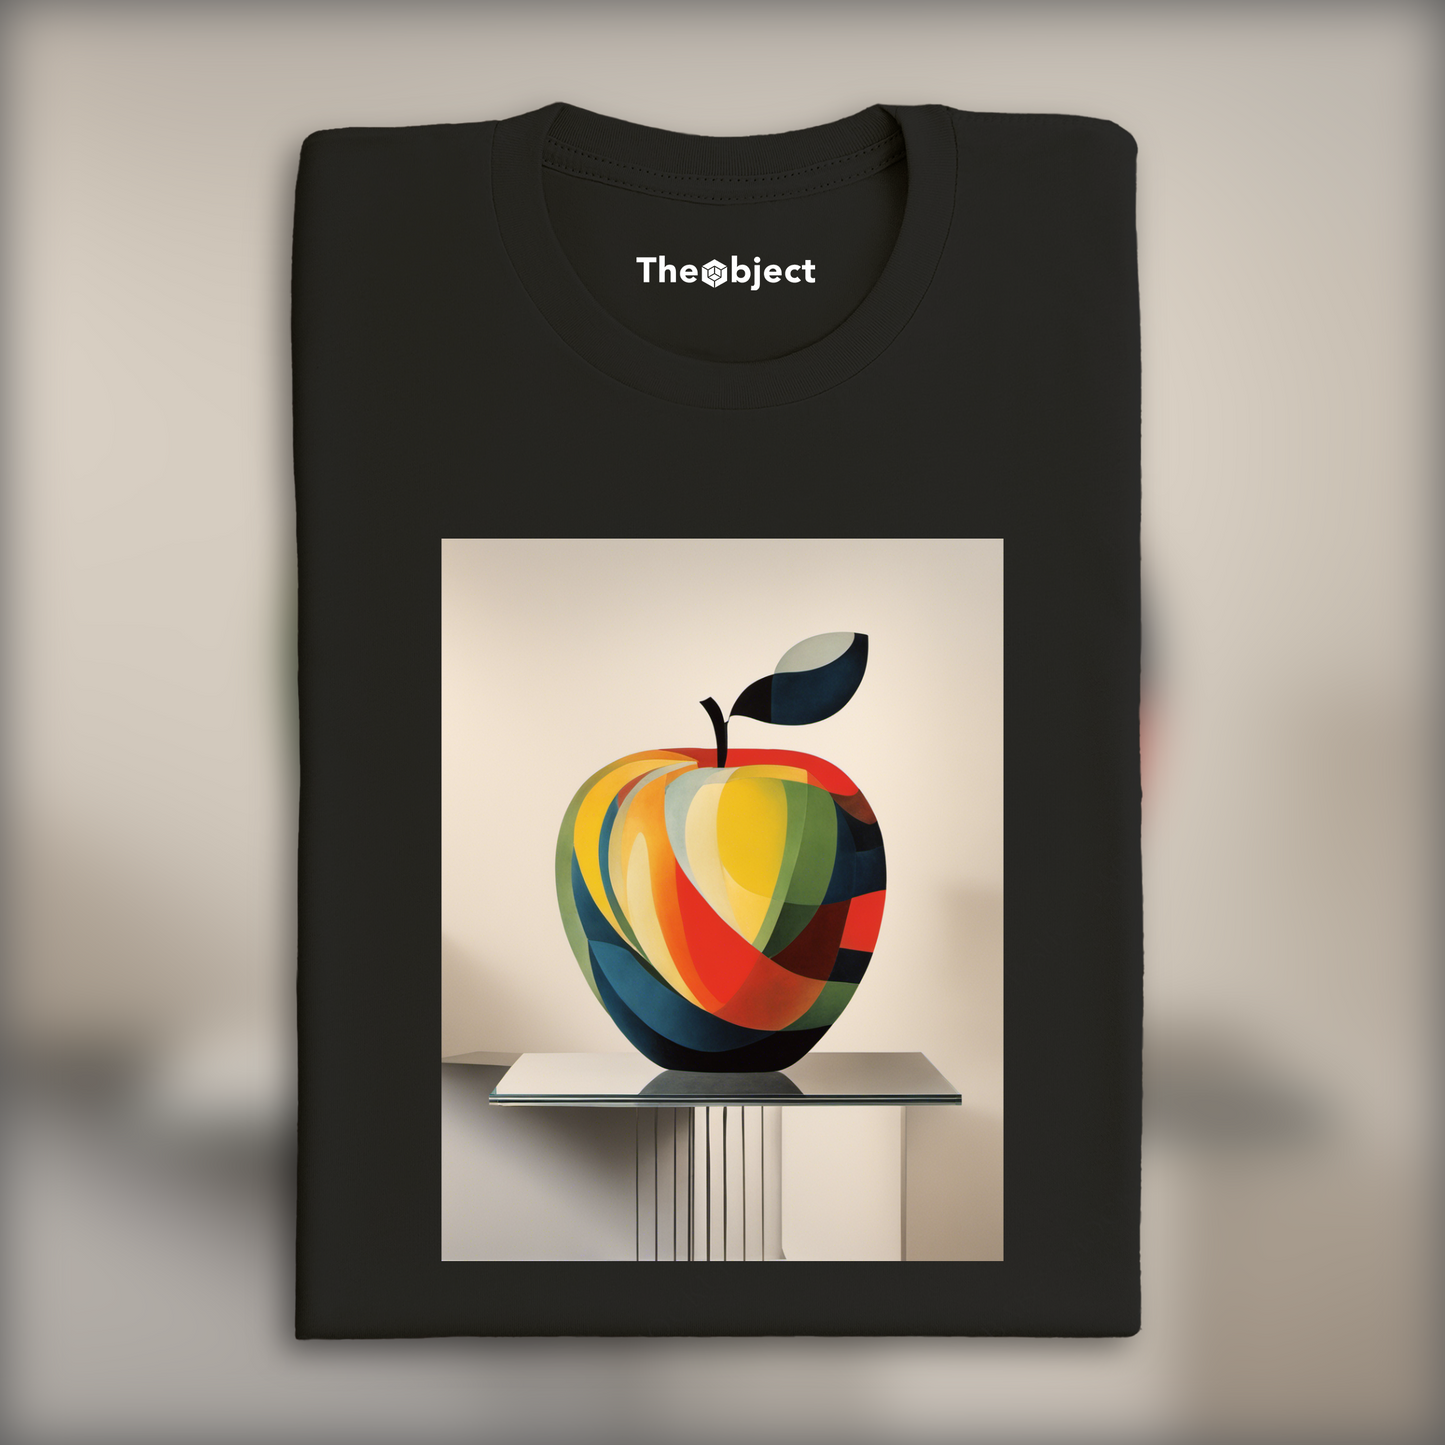 T-Shirt - Willi Baumeister, Pomme - 2705153131